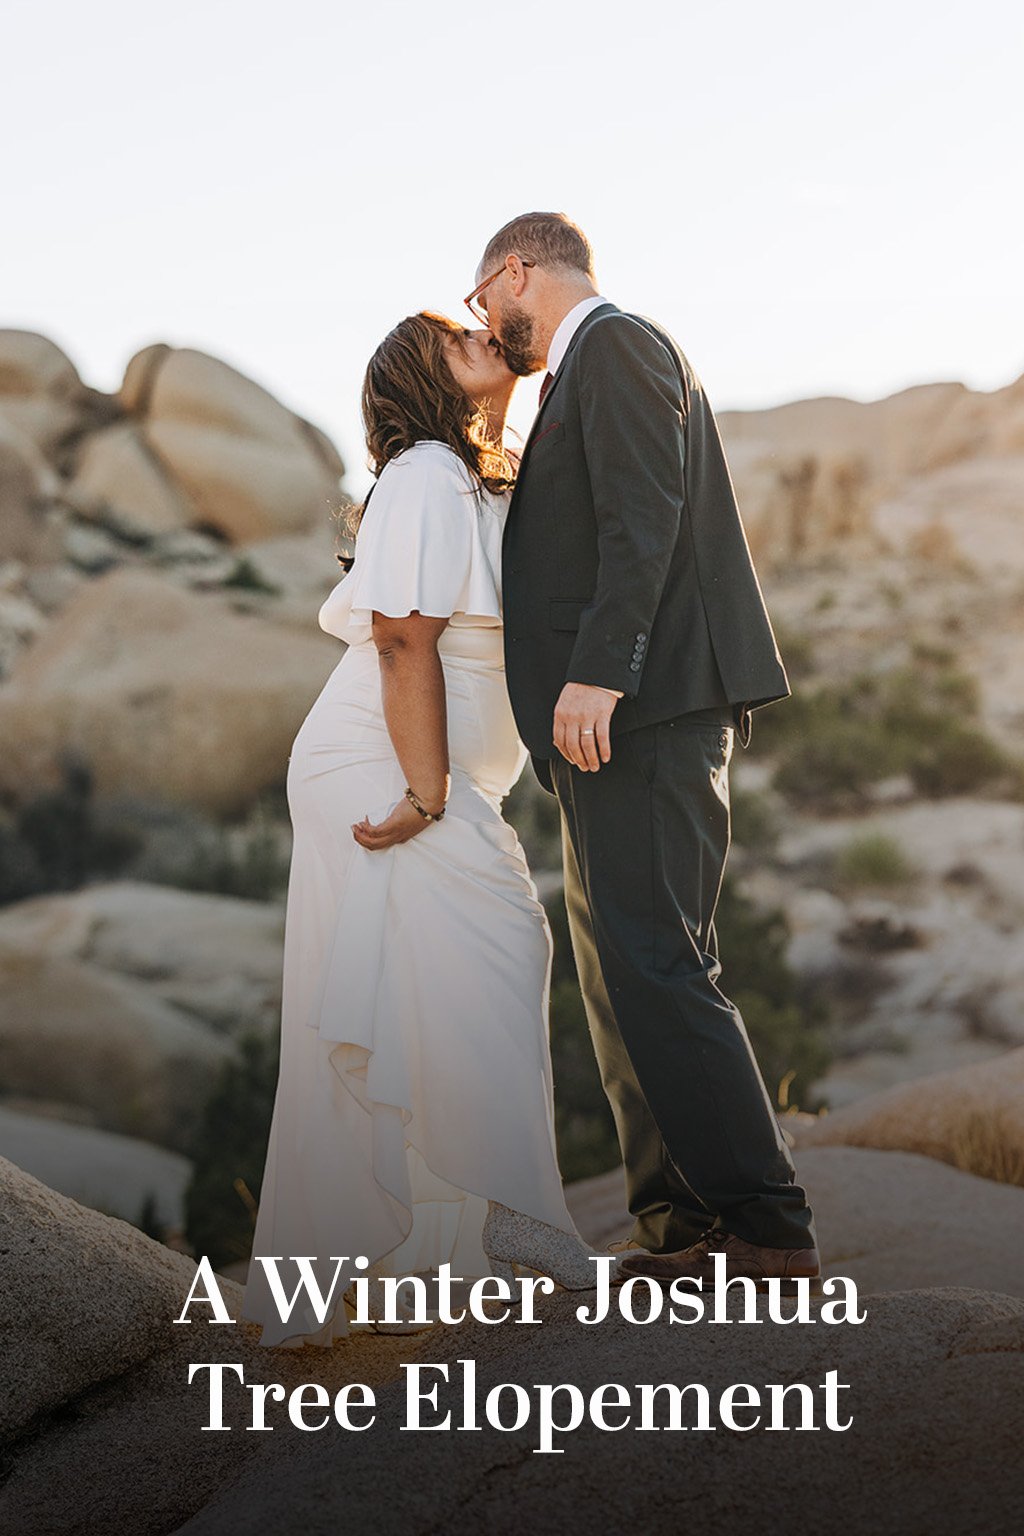 A married couple kisses in Joshua Tree with text reading "A Winter Joshua Tree Elopement".